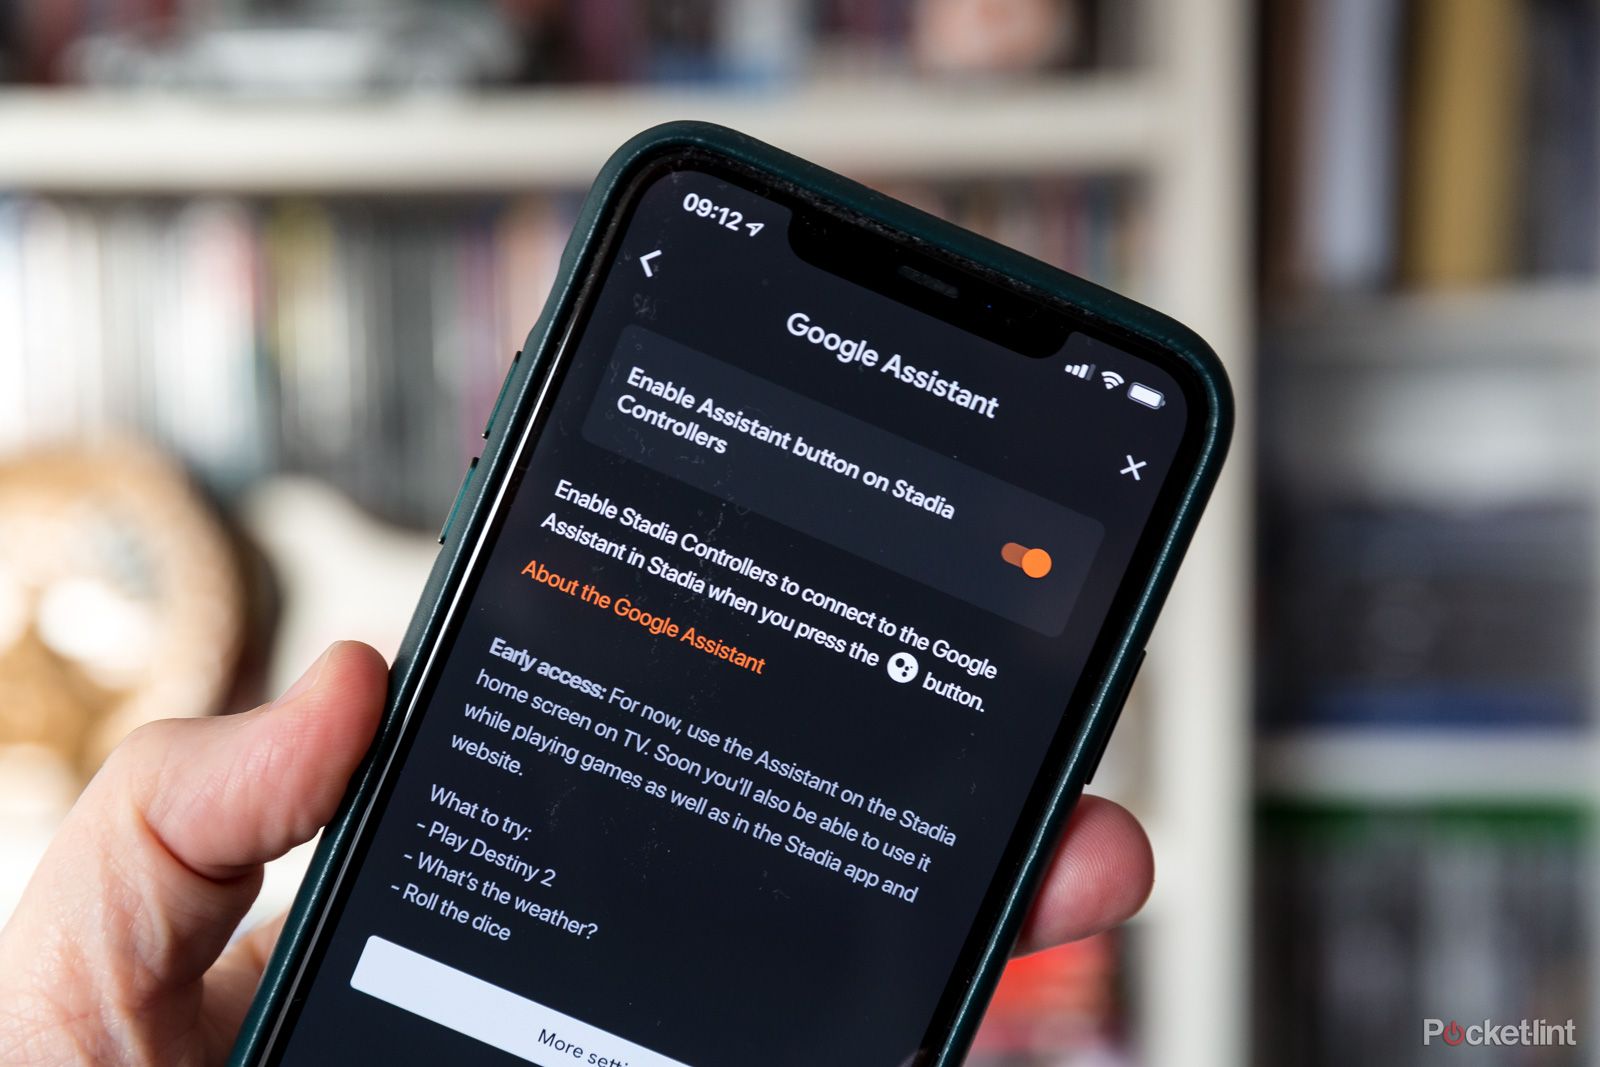 Stadia gets Google Assistant support but restricted for now image 1